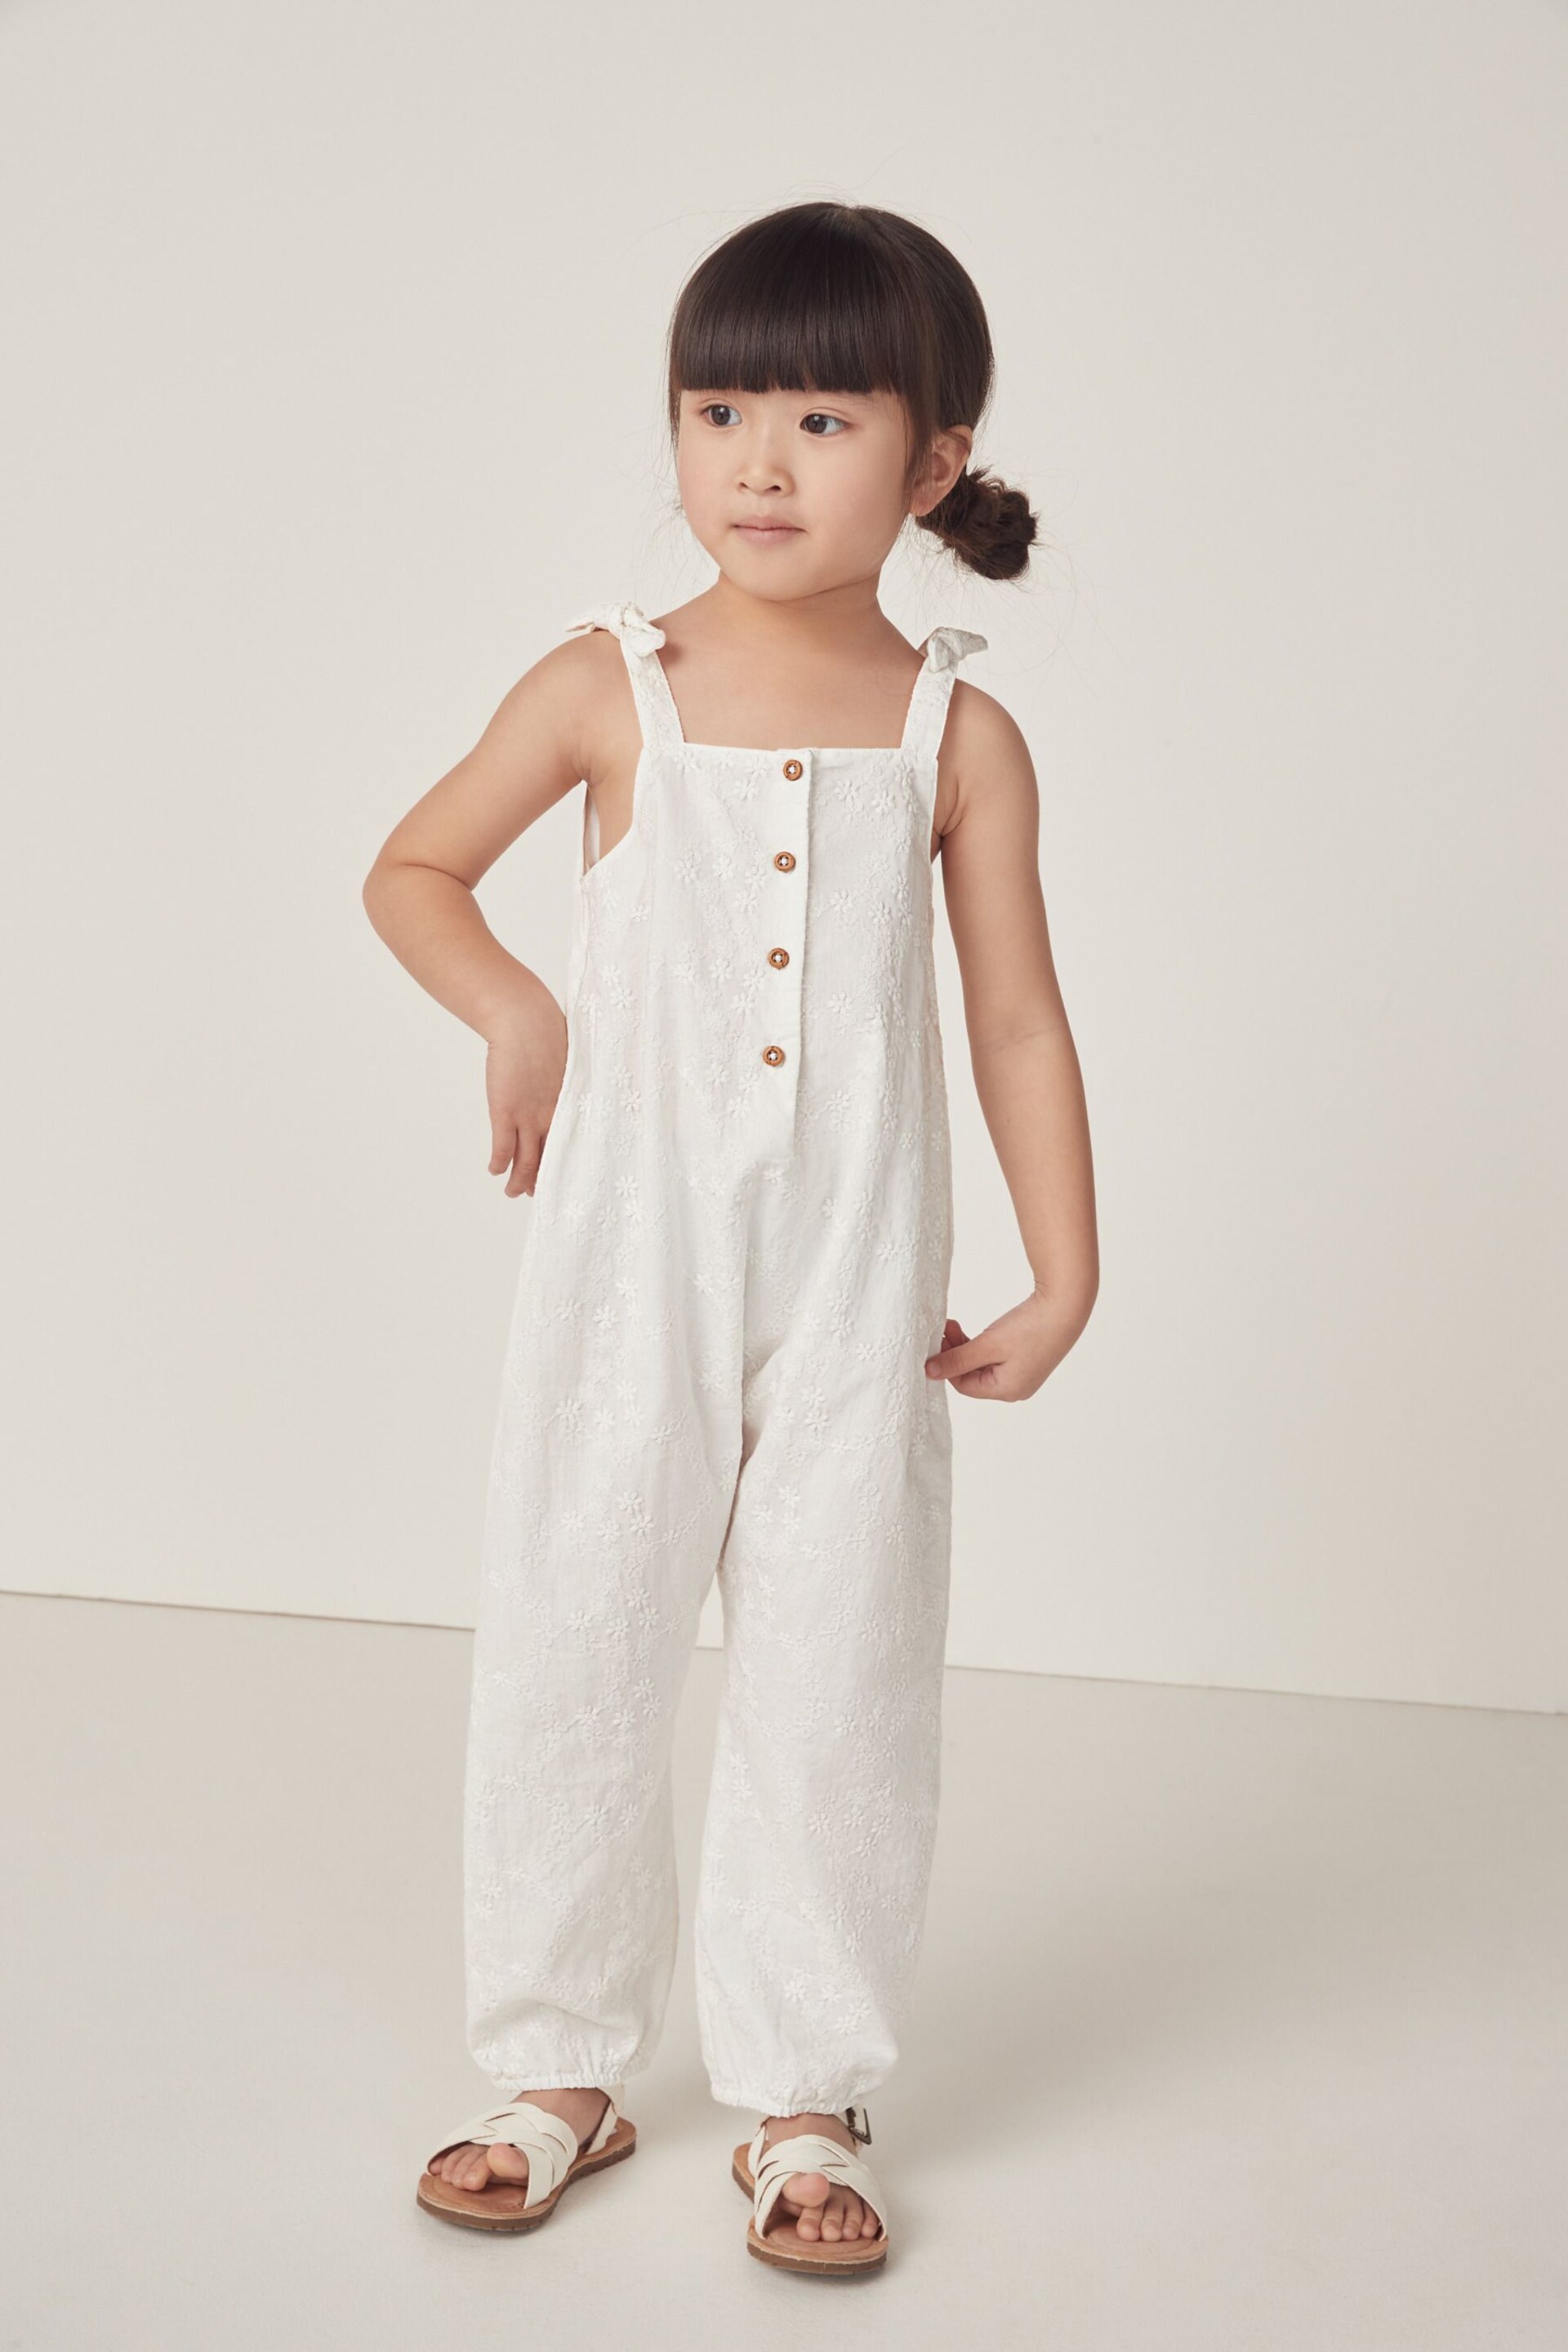 The White Company Cotton Broderie Tie Shoulder White Romper - Image 1 of 6